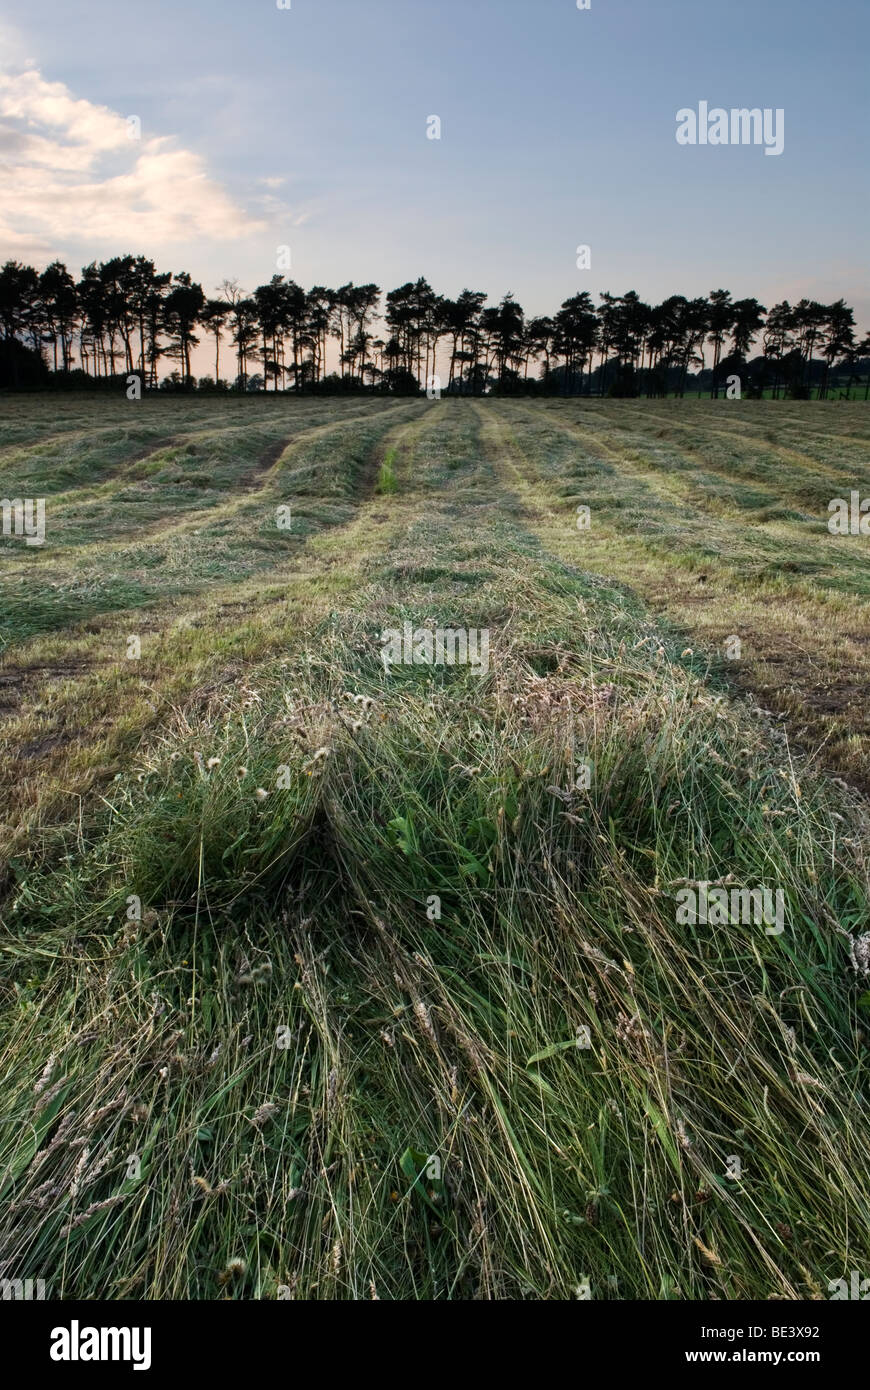 A field of cut grass waiting to be made into hay Stock Photo